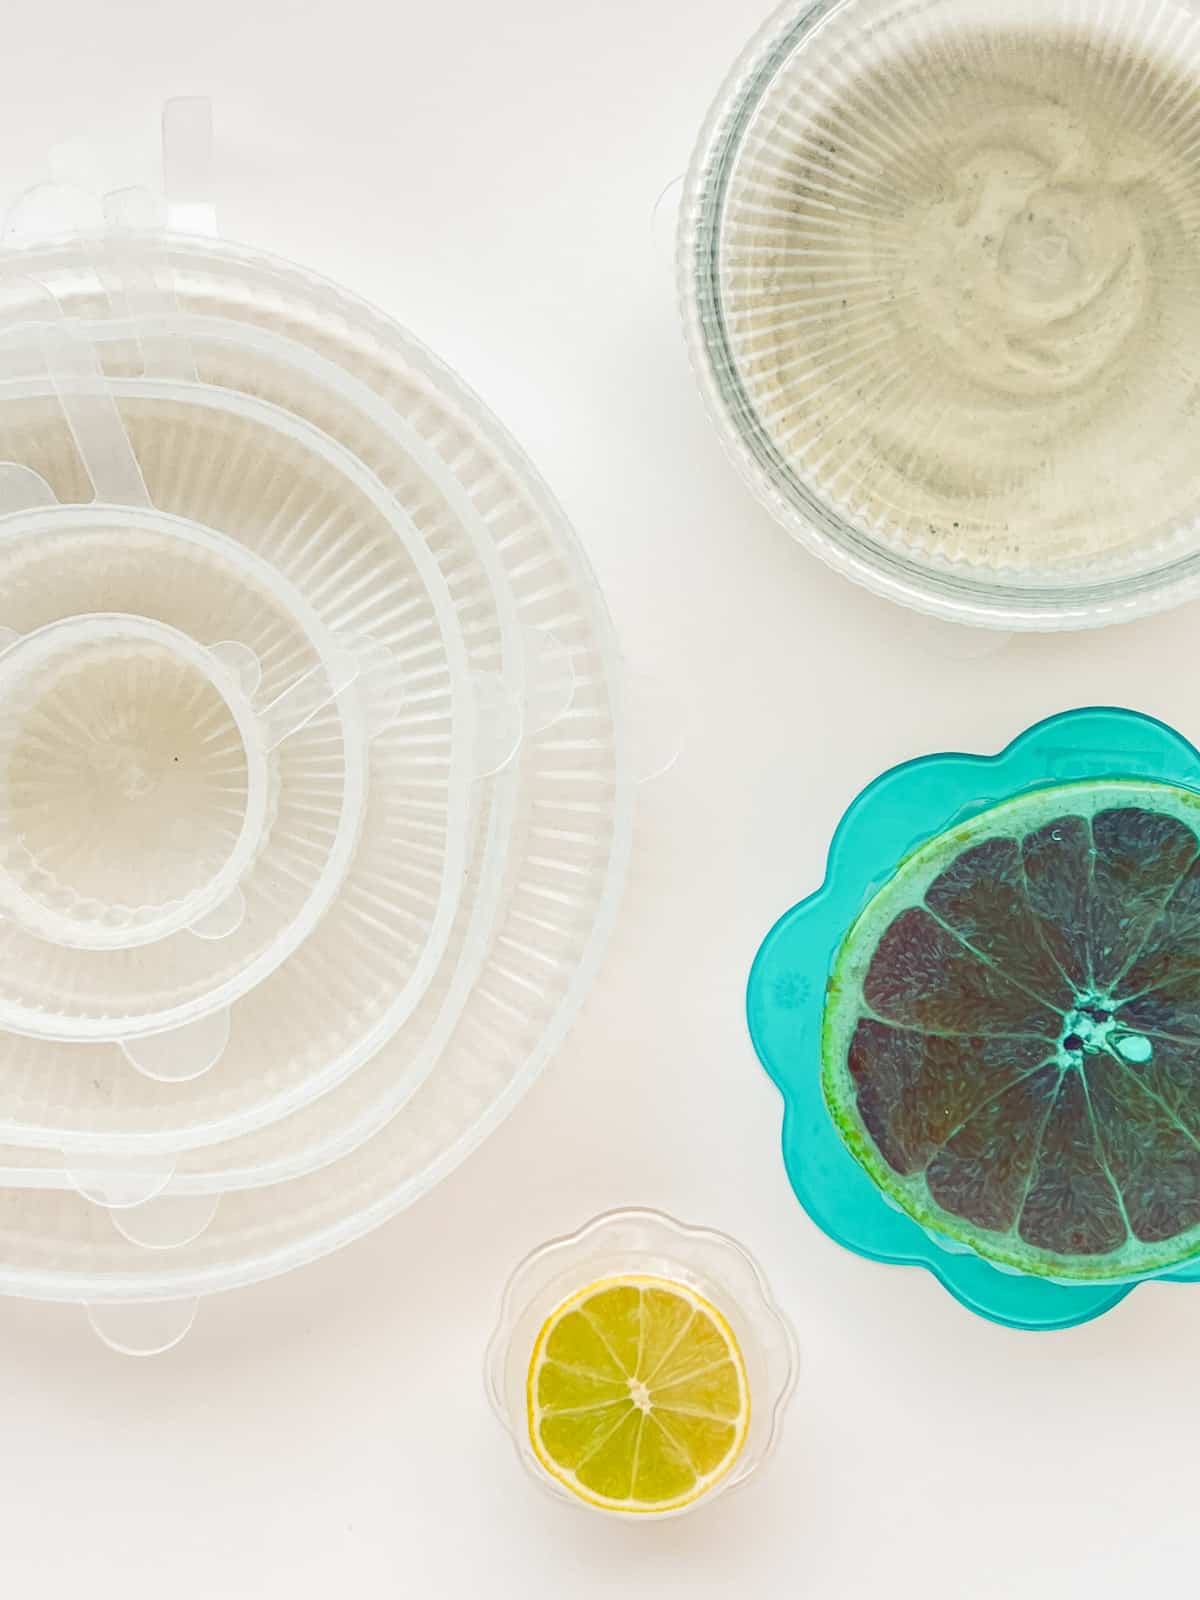 An image of a selection of different kinds of silicone stretch lids, including a few that are covering cut citrus fruit and one that is covering a glass bowl.